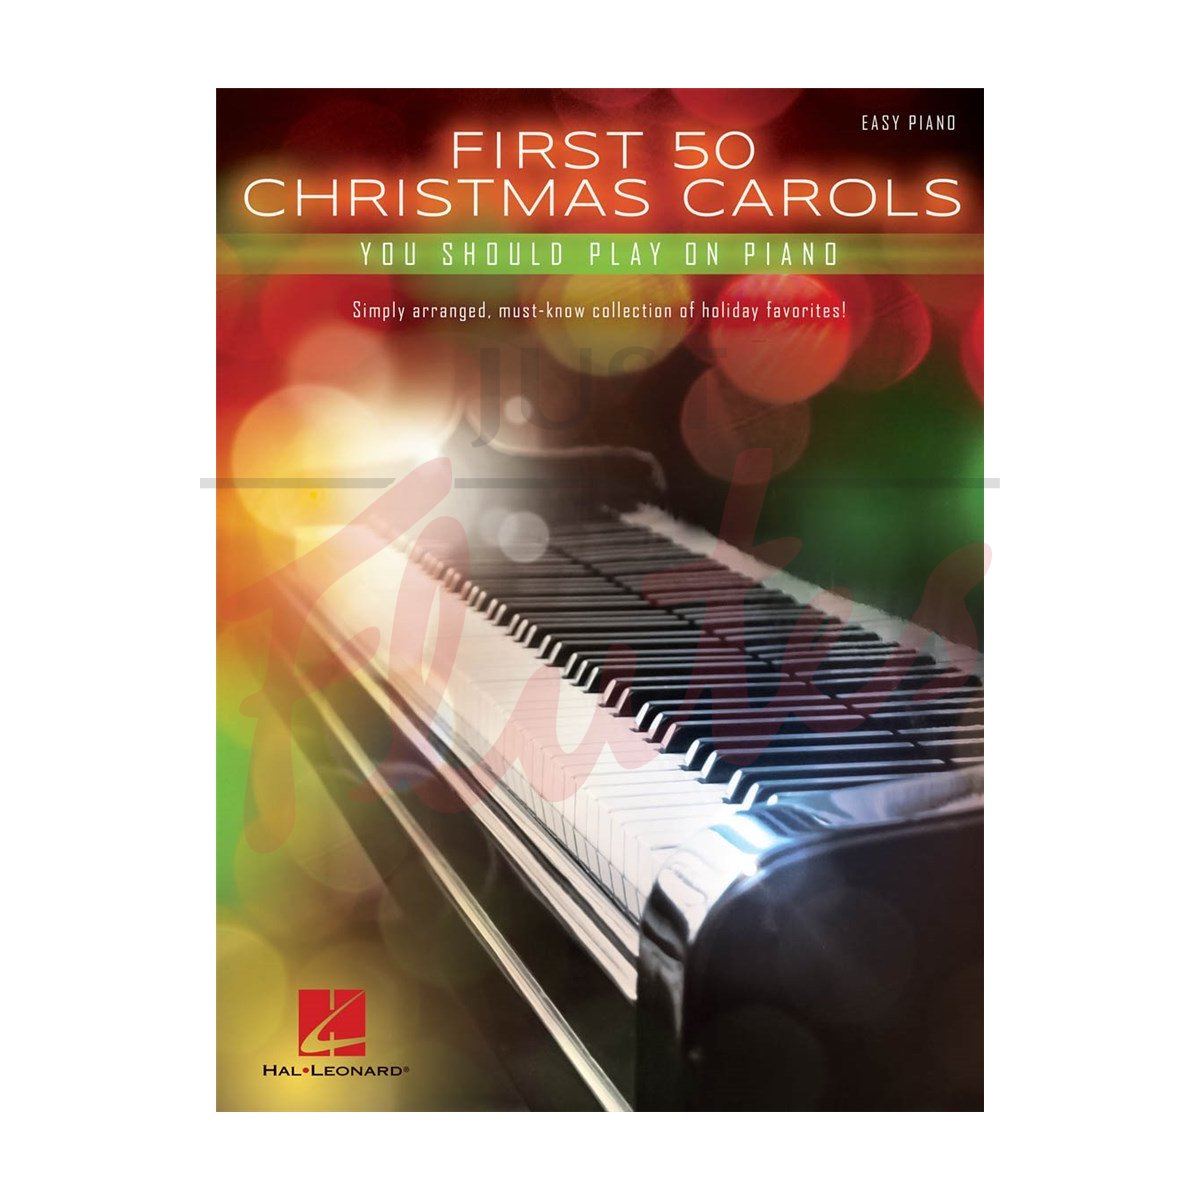 First 50 Christmas Carols for Piano